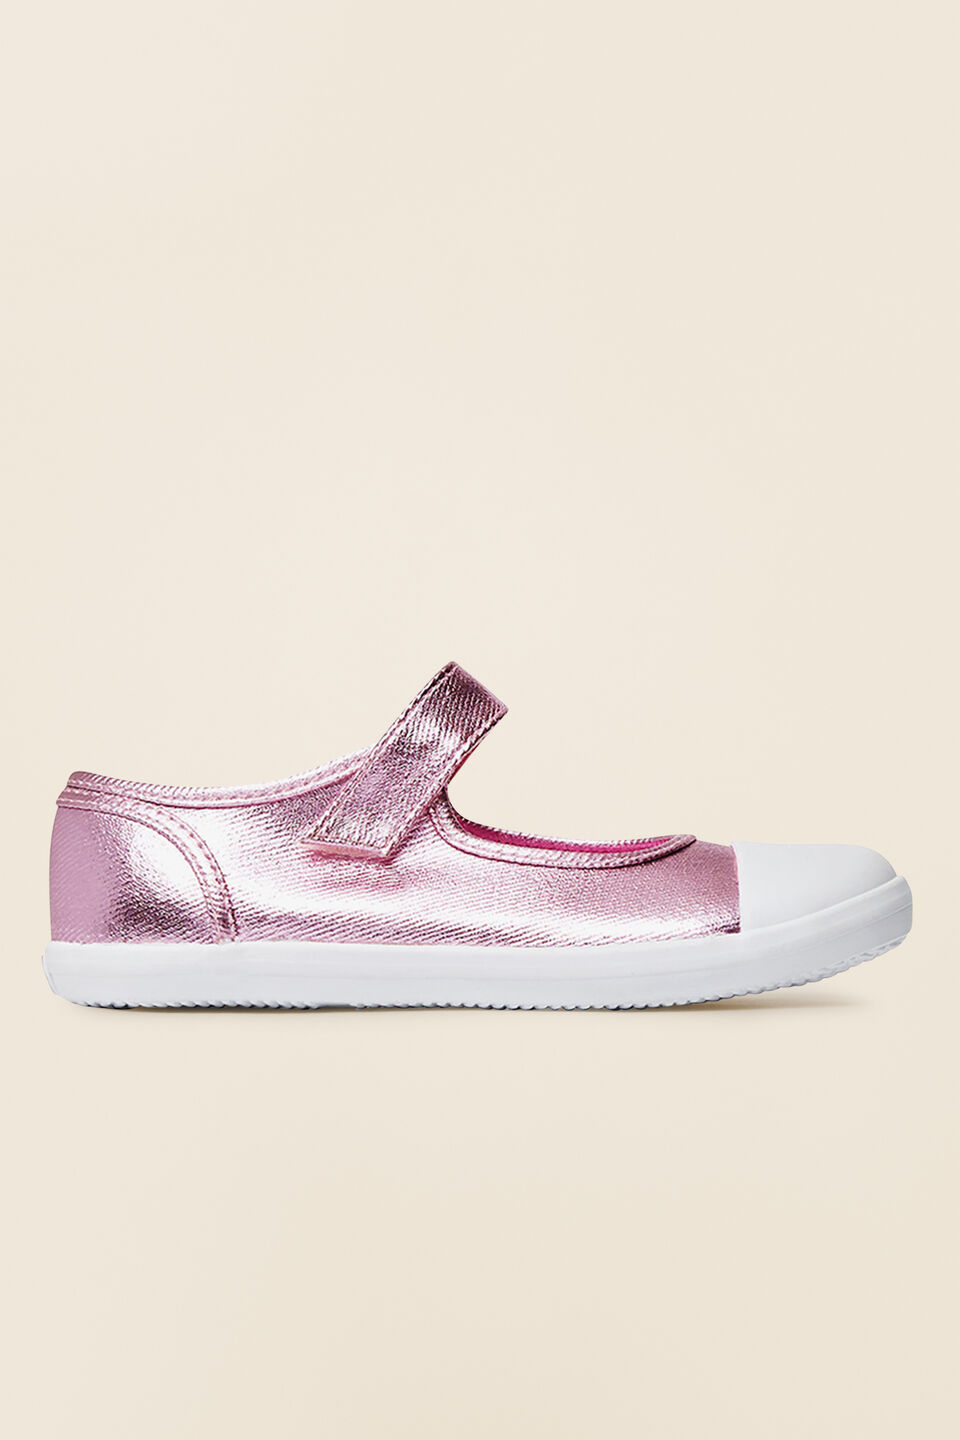 Mary Jane Canvas Shoes  Pink Metallic